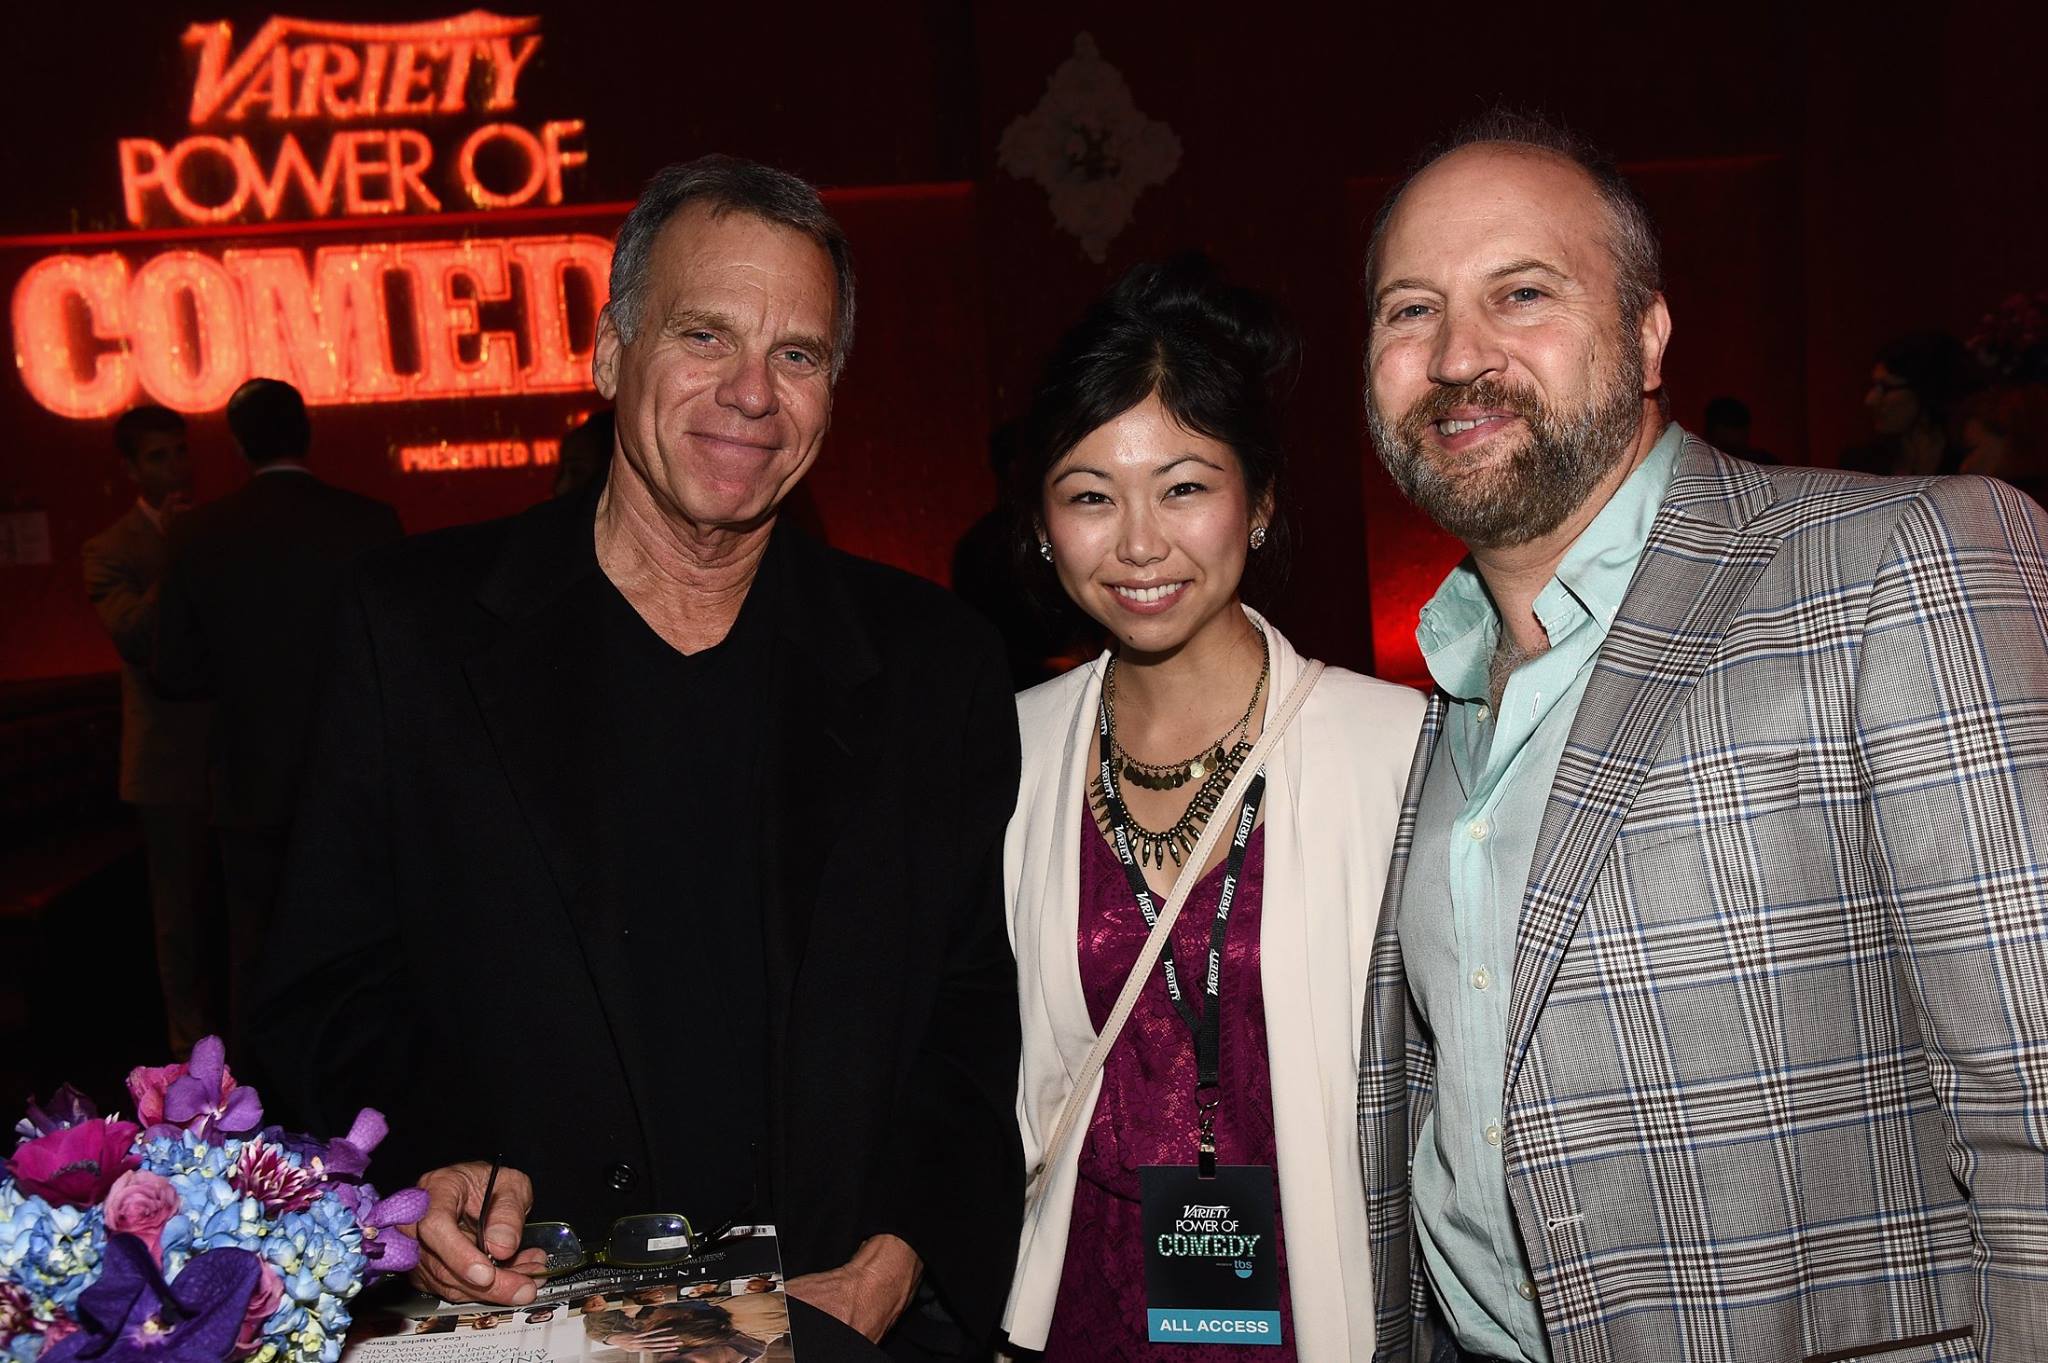 LOS ANGELES, CA DECEMBER 11 (L-R) Producer David Permut, Turner Broadcasting Assistant Manager of Social Media Michelle Odakura and writer Phillip Morton attend the pre-reception for Variety's 5th annual Power of Comedy presented by